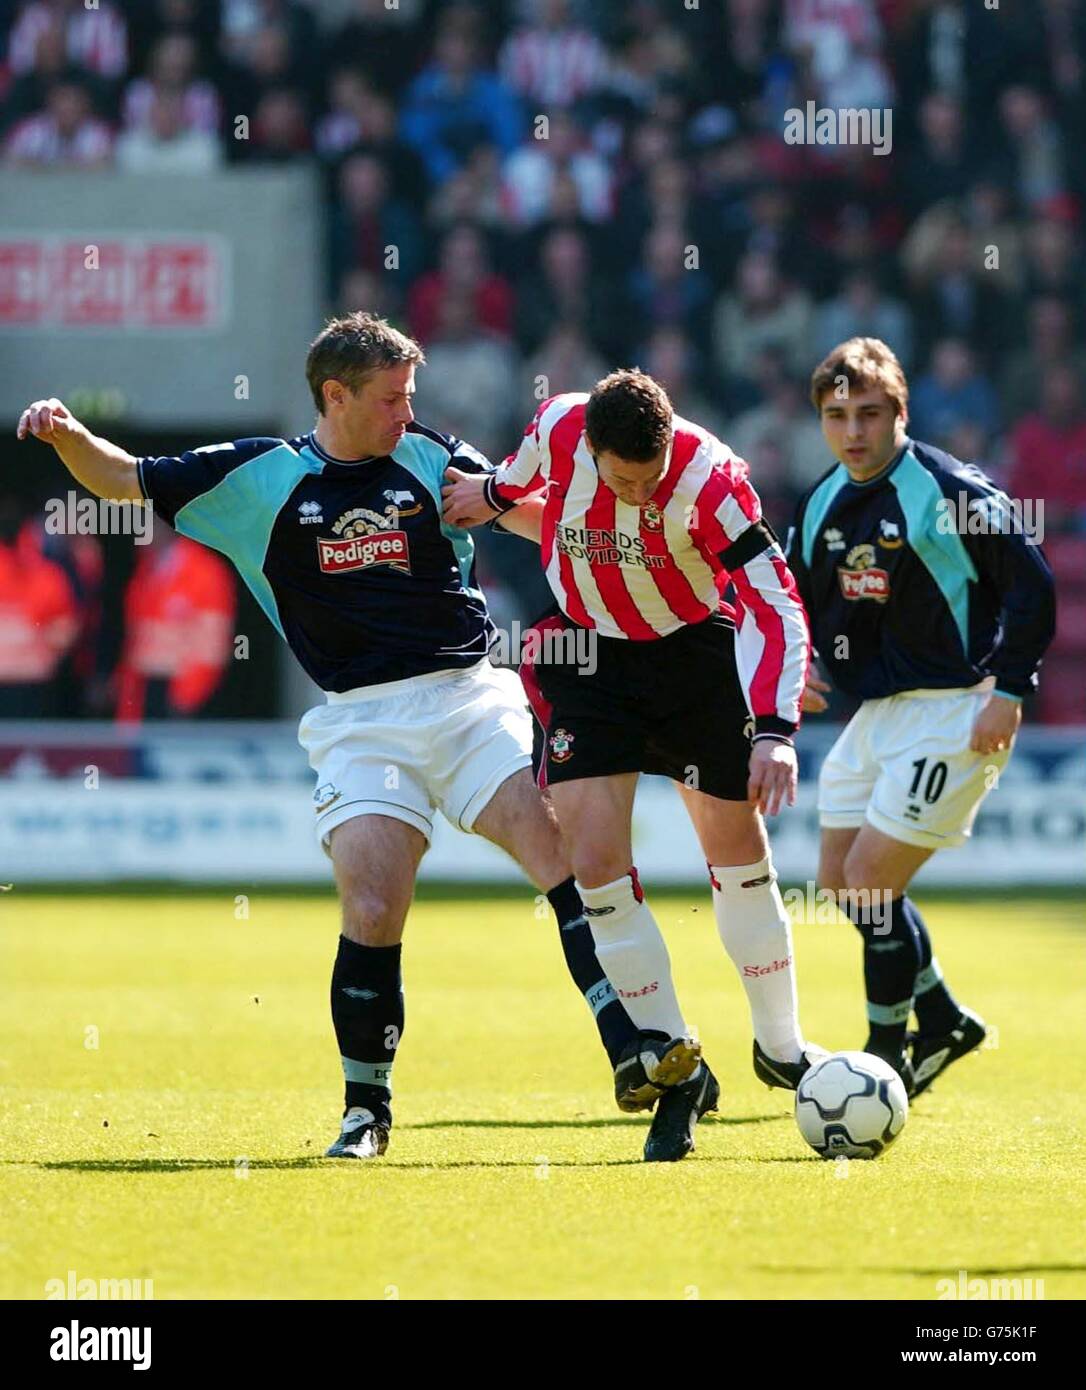 Southampton's Wayne Bridge is sandwiched between Derby County's Robert Lee (L) and Giorgi Kinkladze during their FA Barclaycard Premiership match at Southampton's St Mary's stadium. Stock Photo